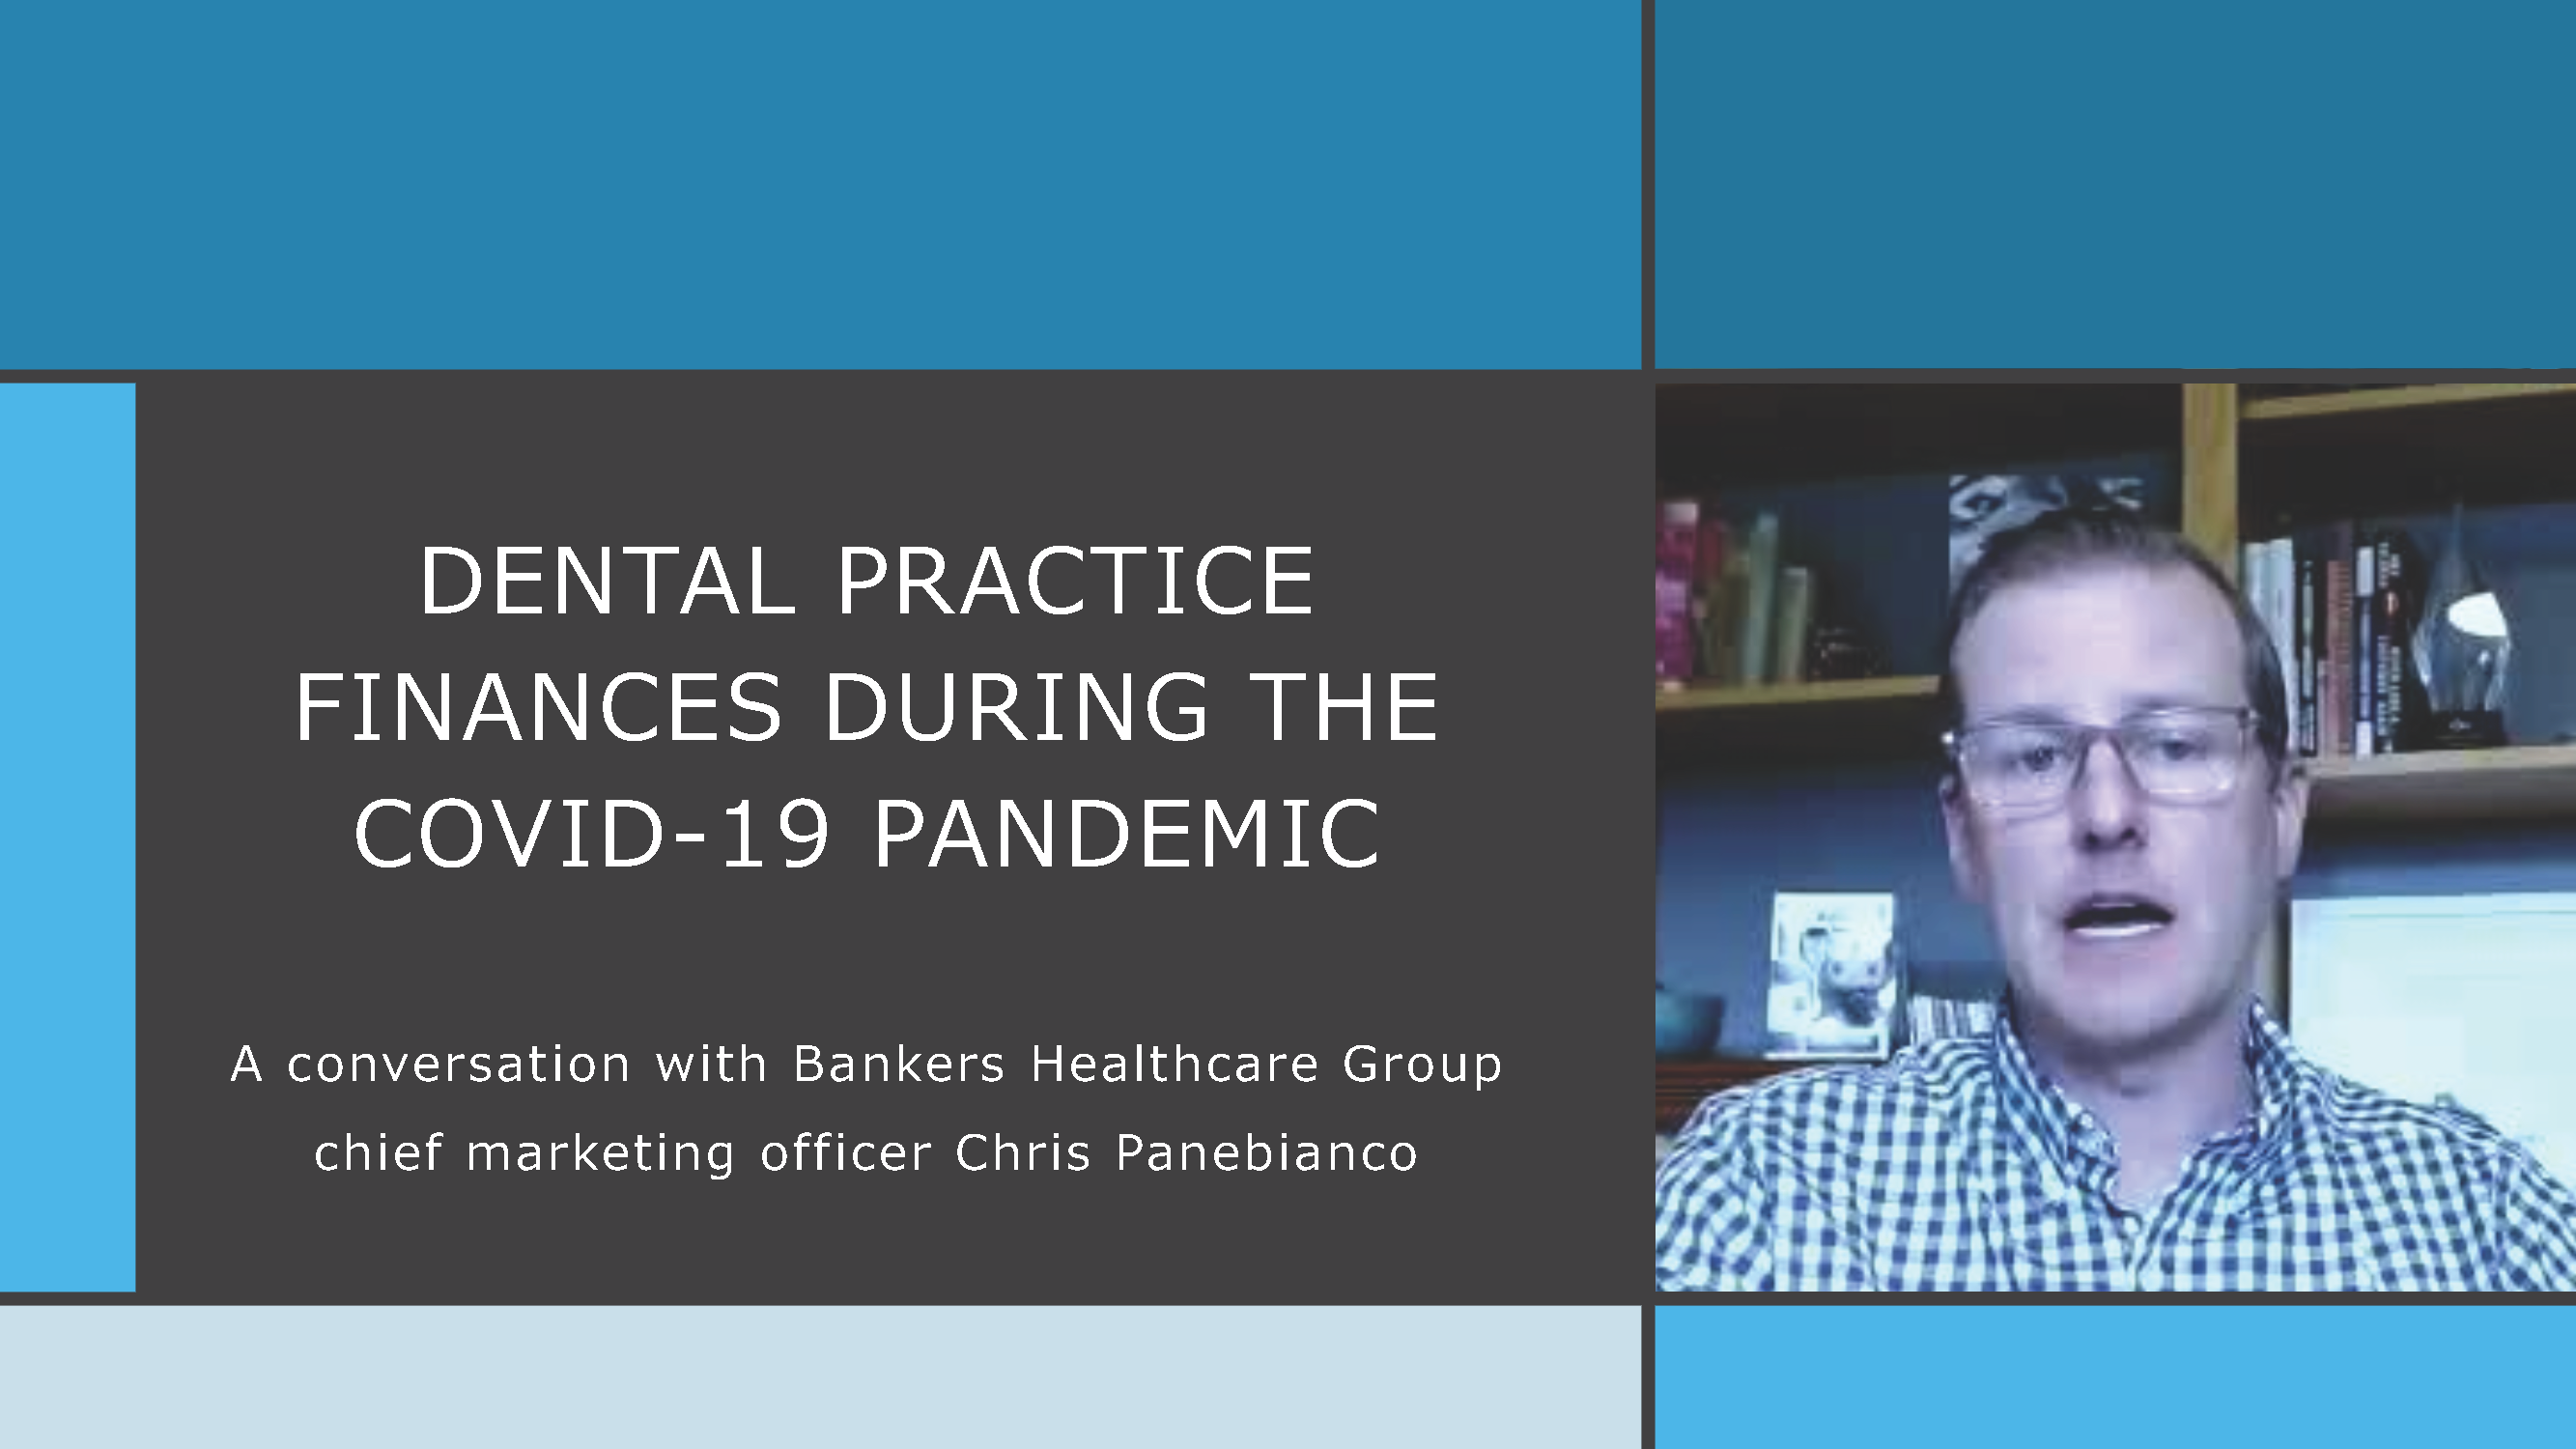 Dental practice finances during the COVID-19 Pandemic